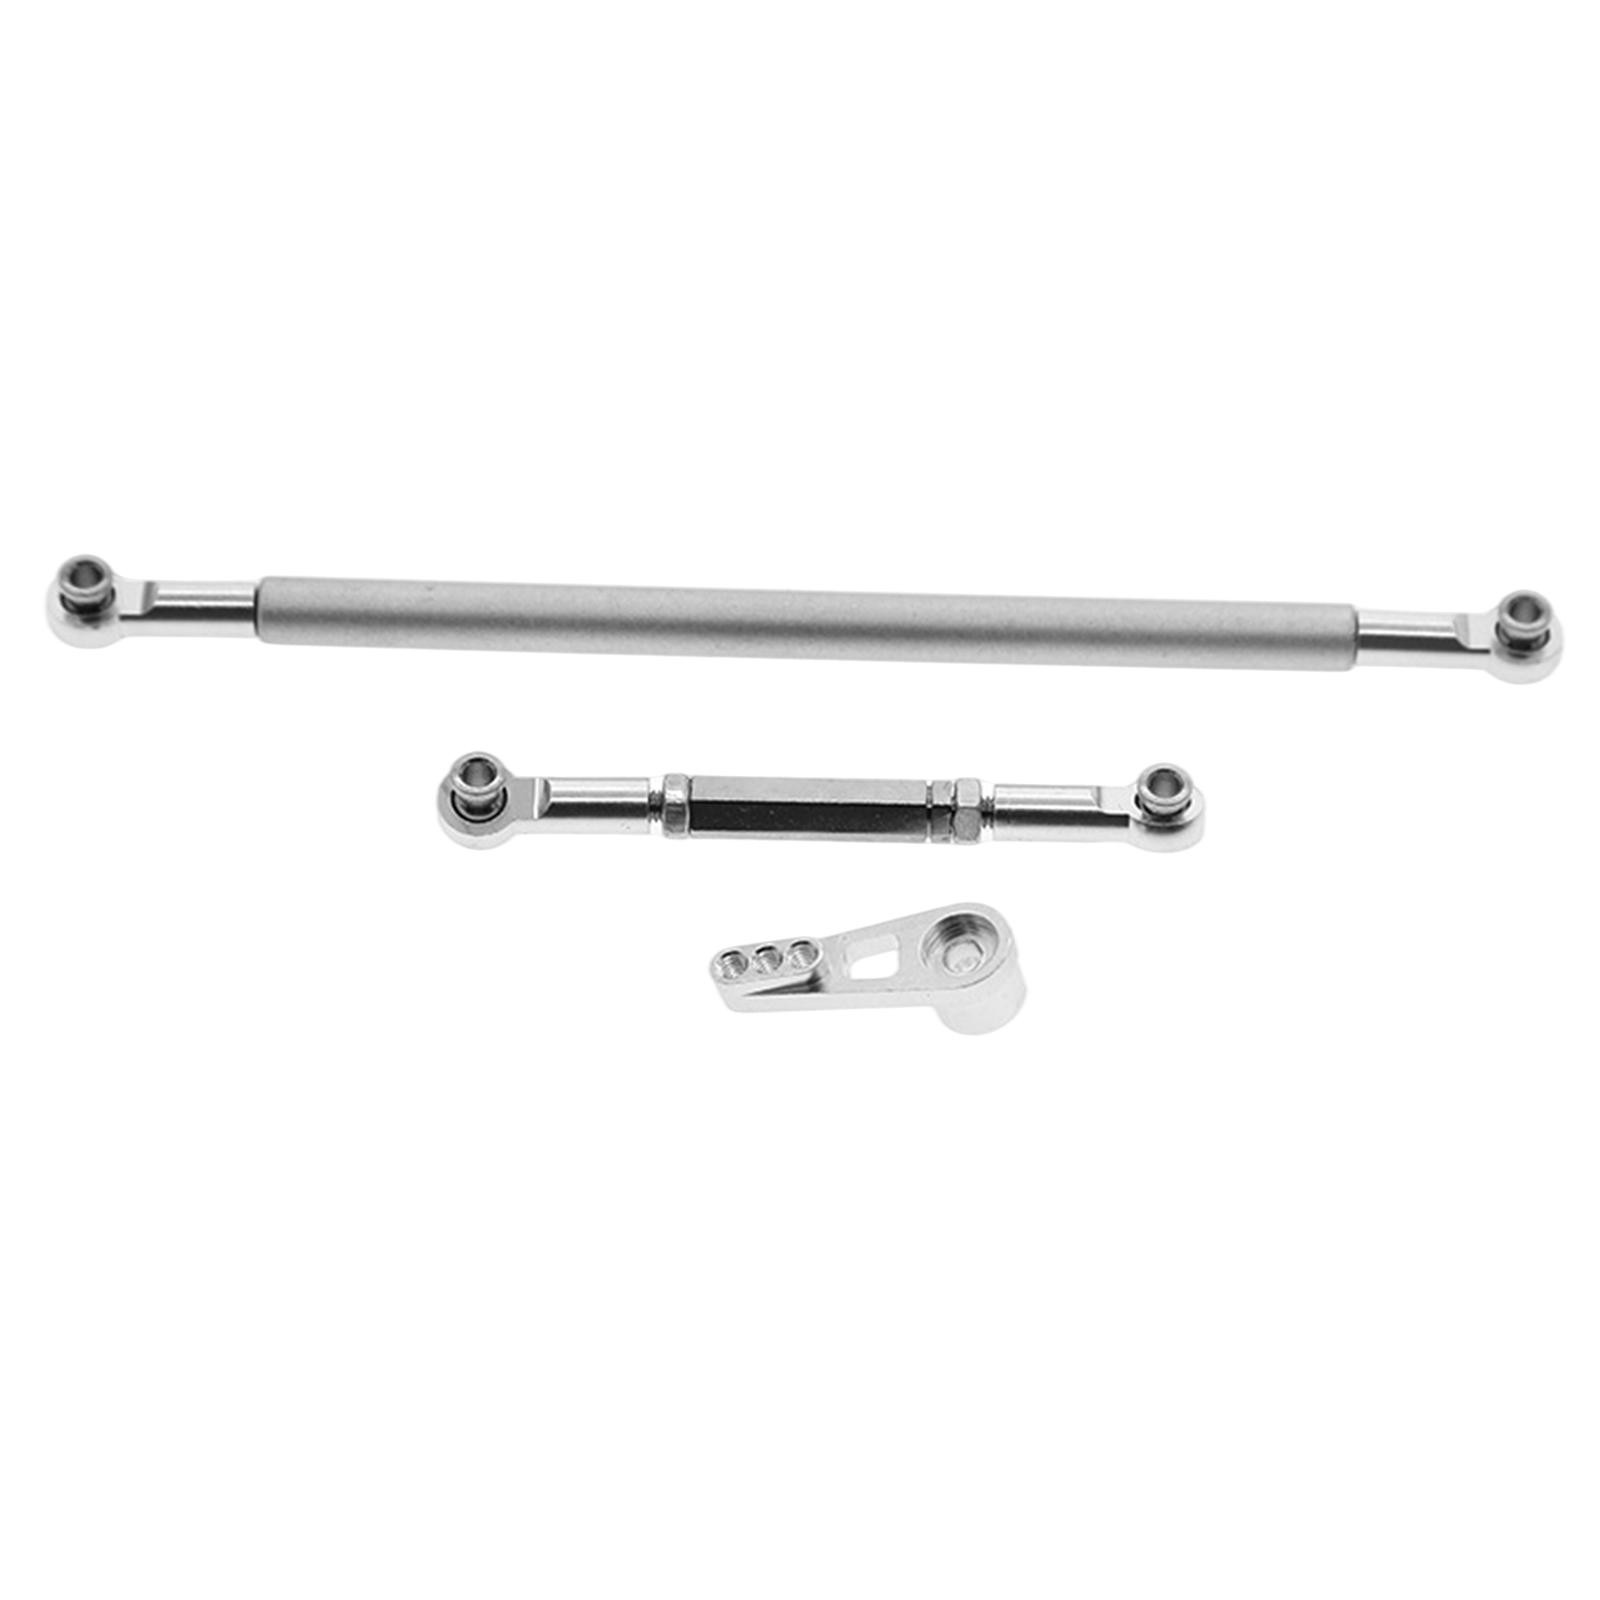 Metal Tie-Rod Steering Arm Servo Linkages For MN86S MN86 1:12 RC Car silver